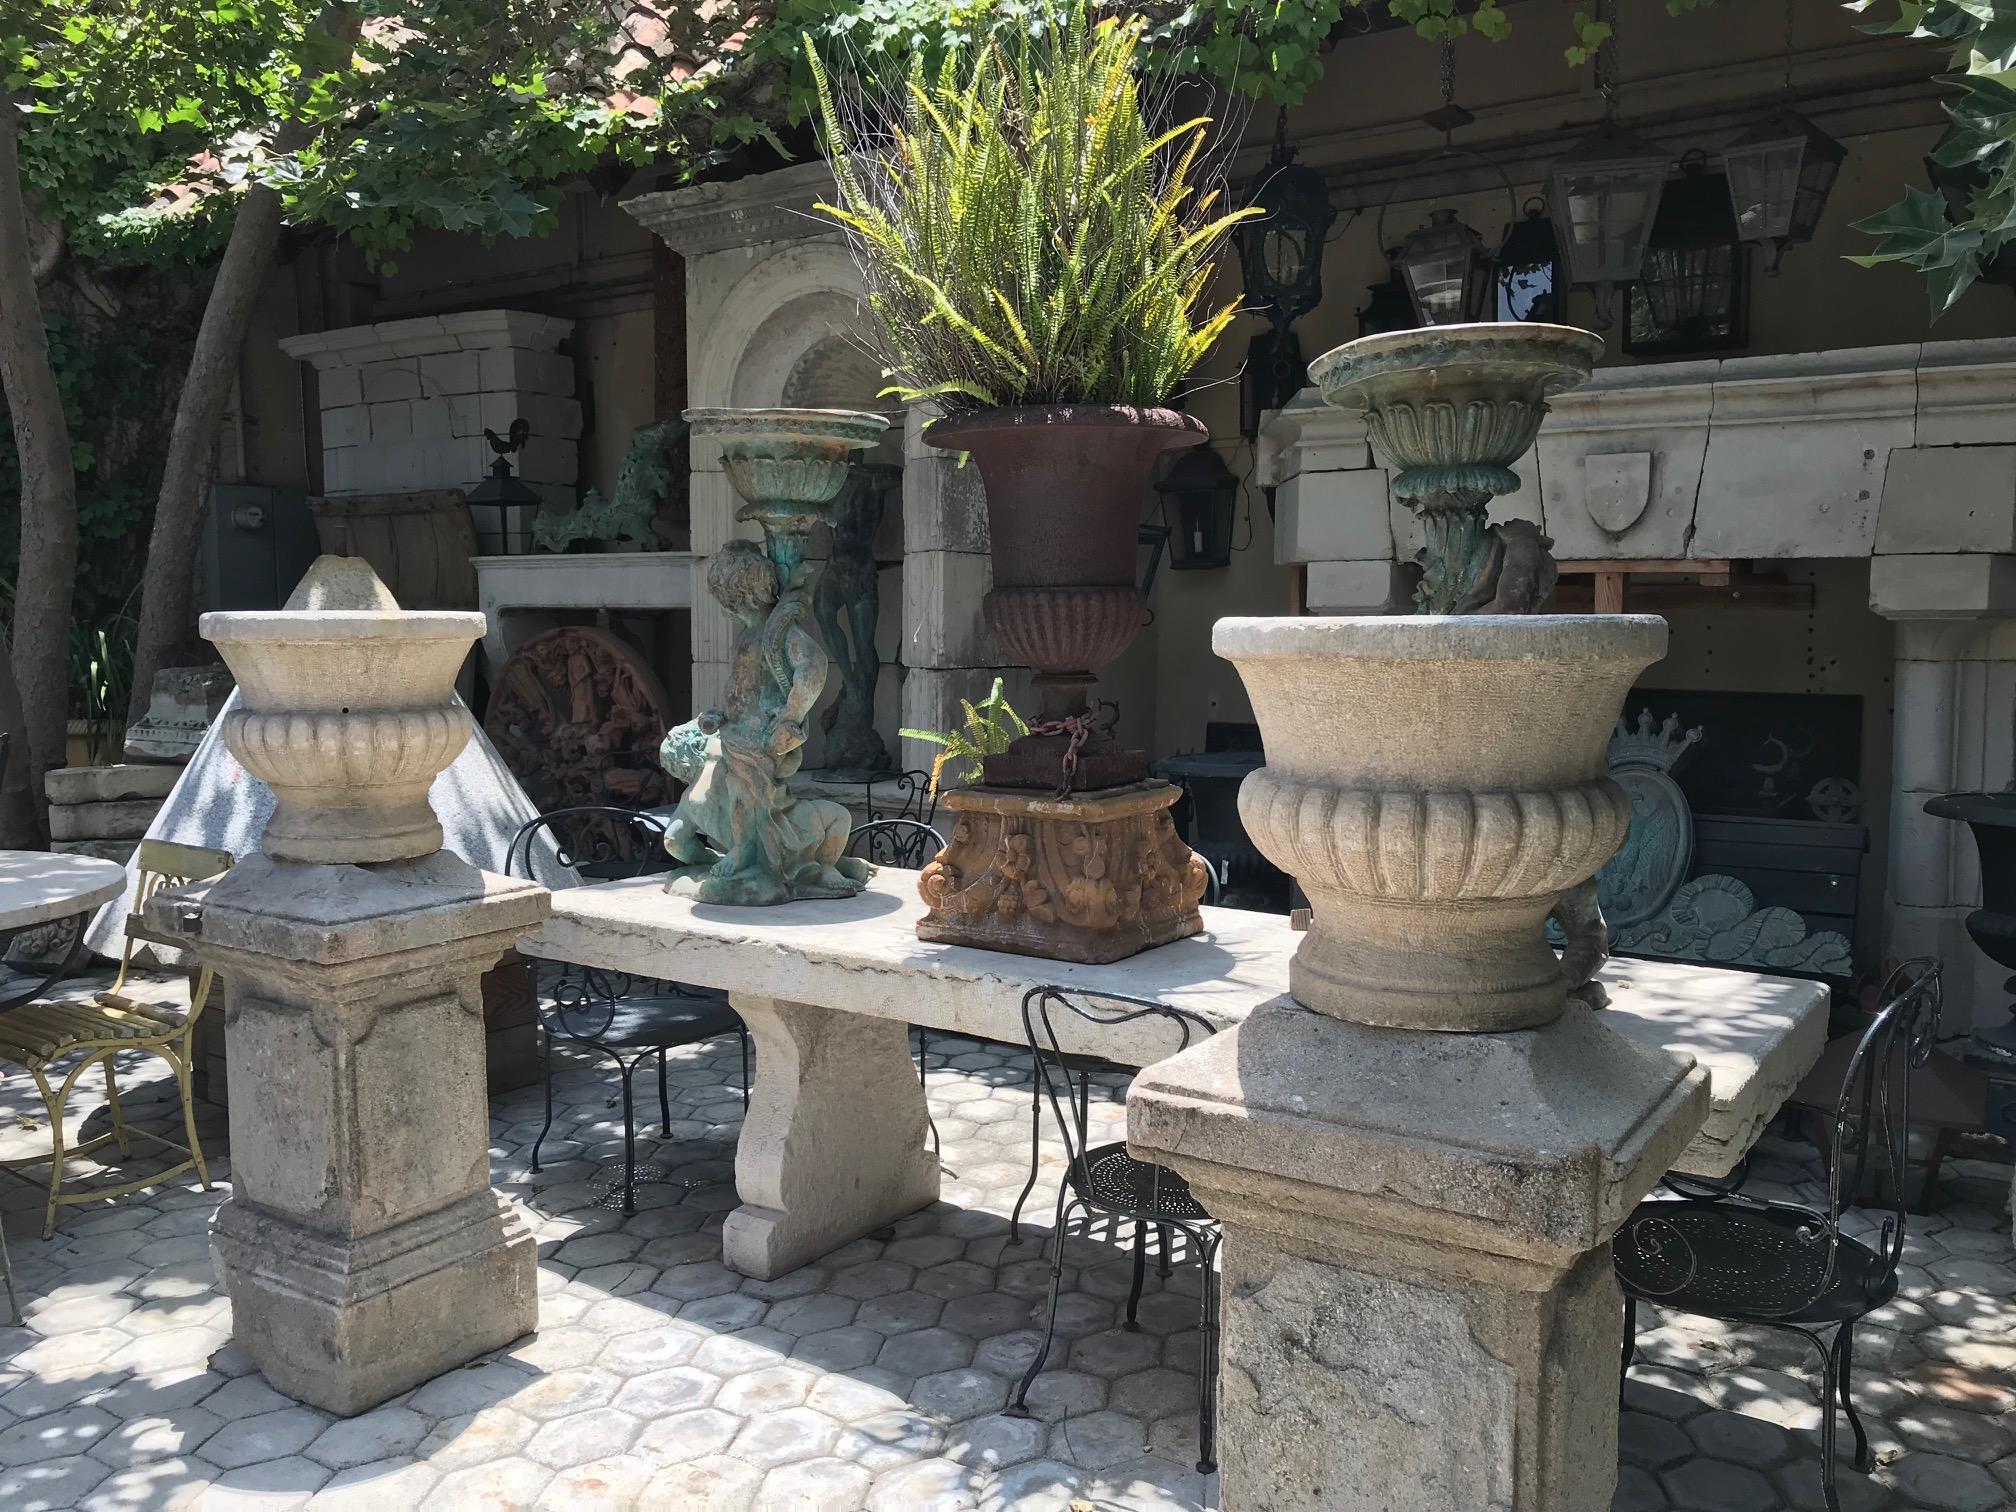 Beautiful late 18th century pair of carved limestone Vasque jardinières urn (urns). Hand carved stone planters having a nicely textured surface. they could be standing alone as decorative objects or could be used as a planters These hand carved